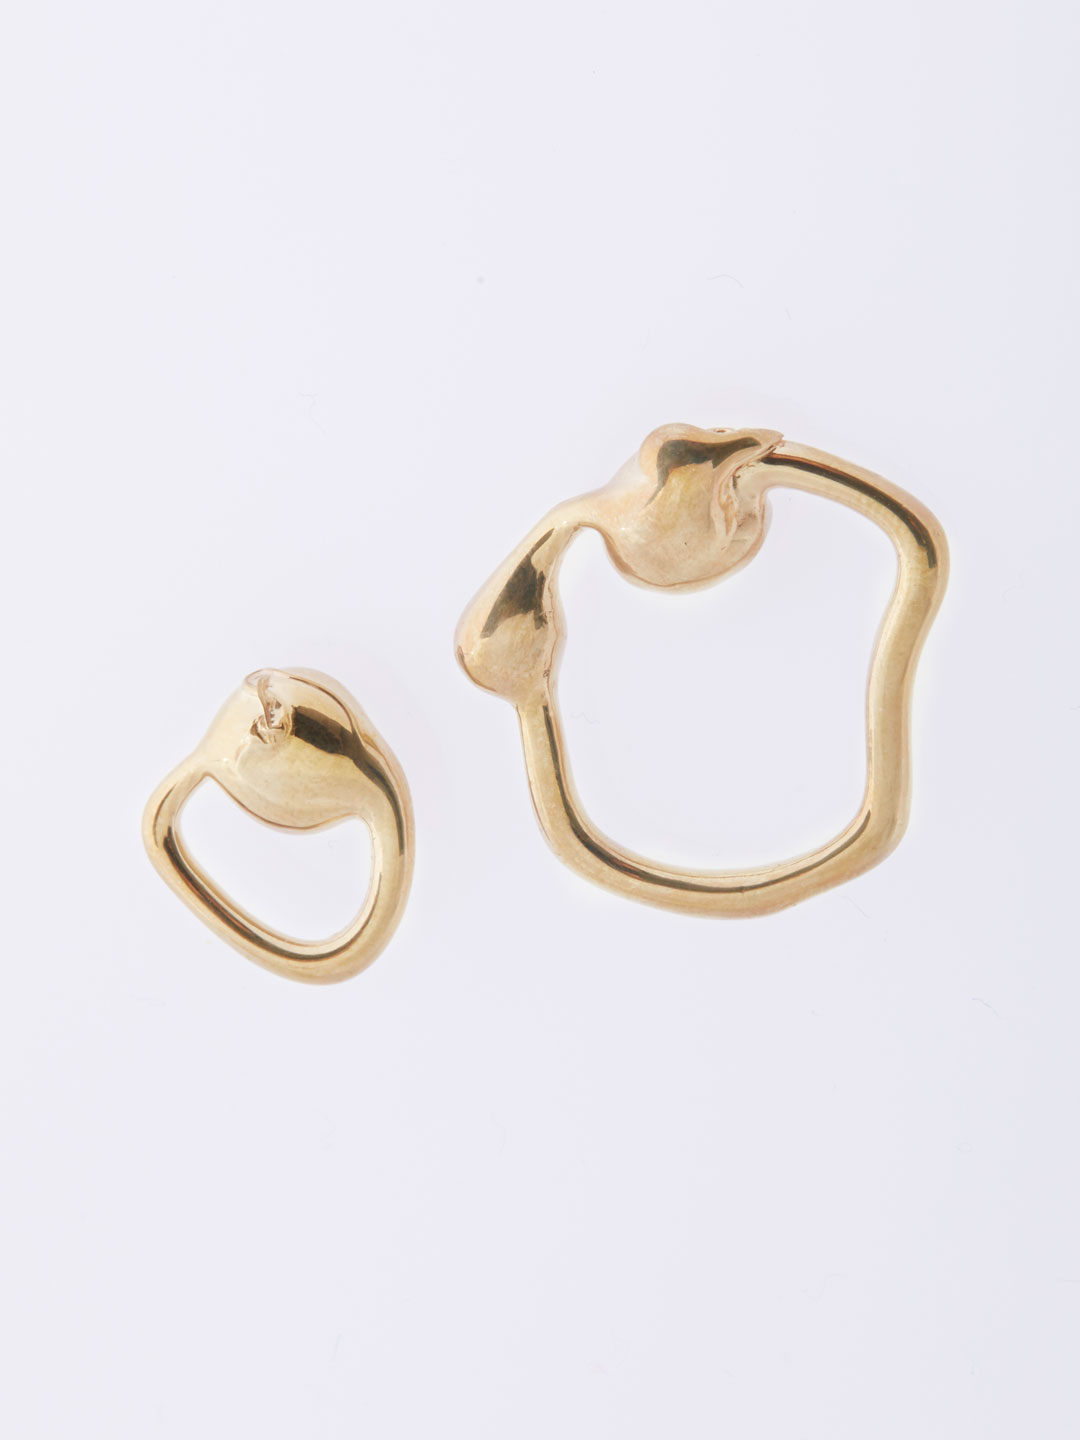 Petite Extrusion Studs Pierced Earrings - Gold